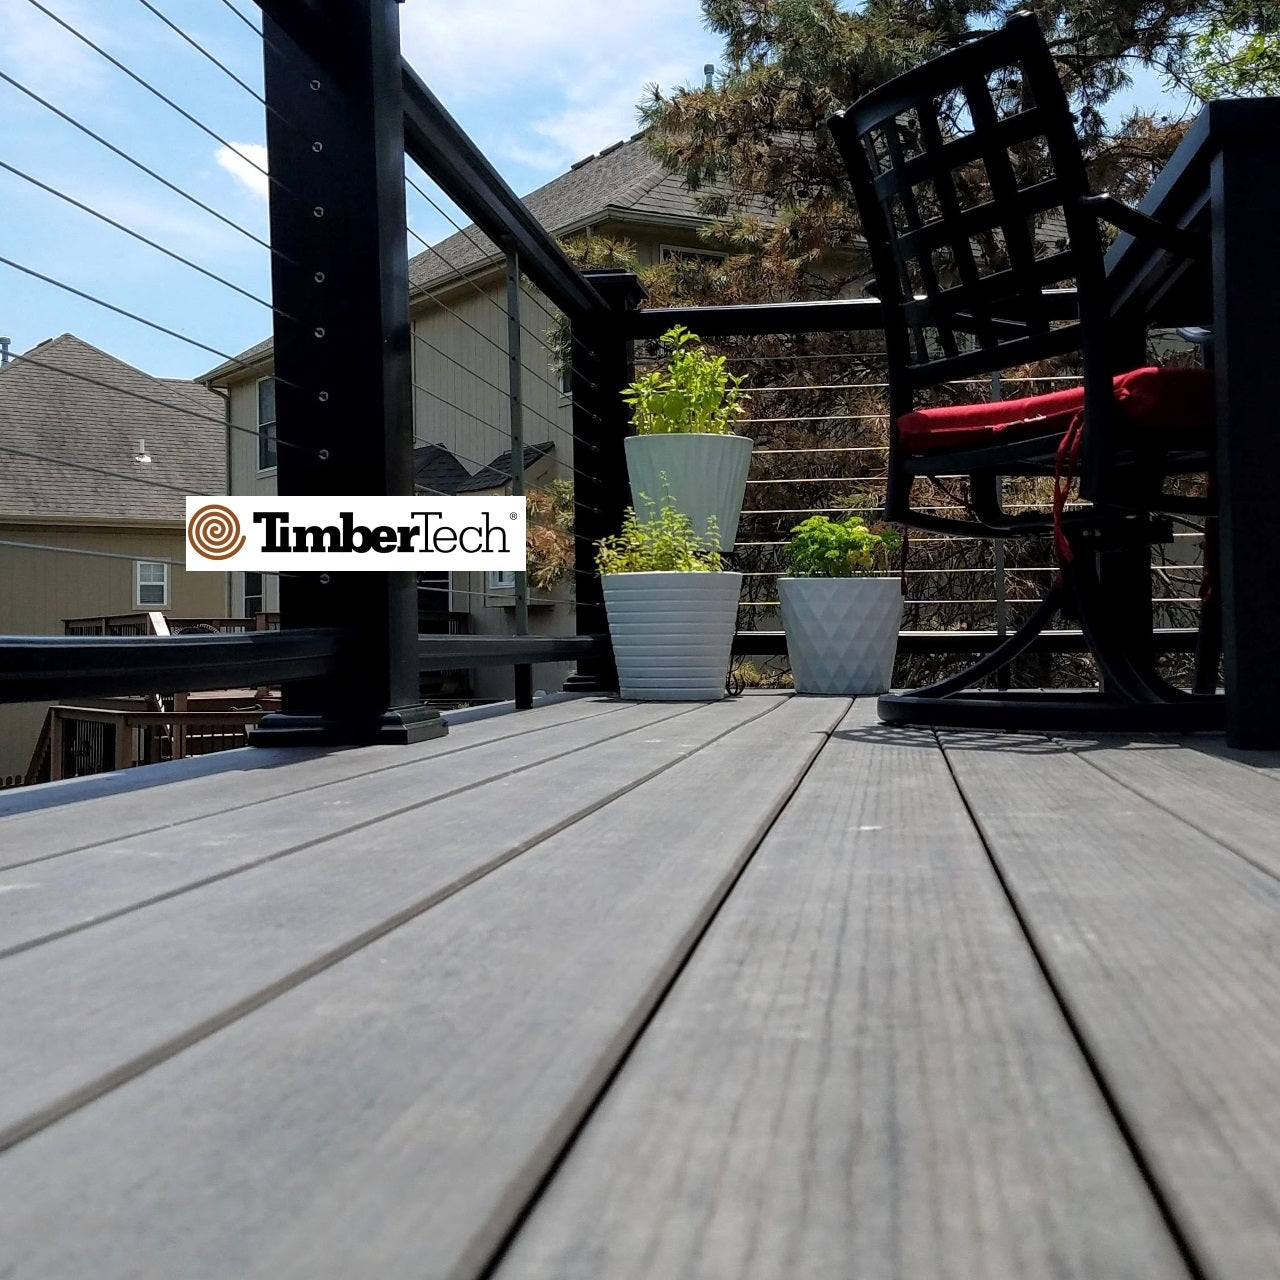 TimberTech Decking and Railing are some of the most trusted and reputable deck and rail products with a wide range of colors, textures, and profiles